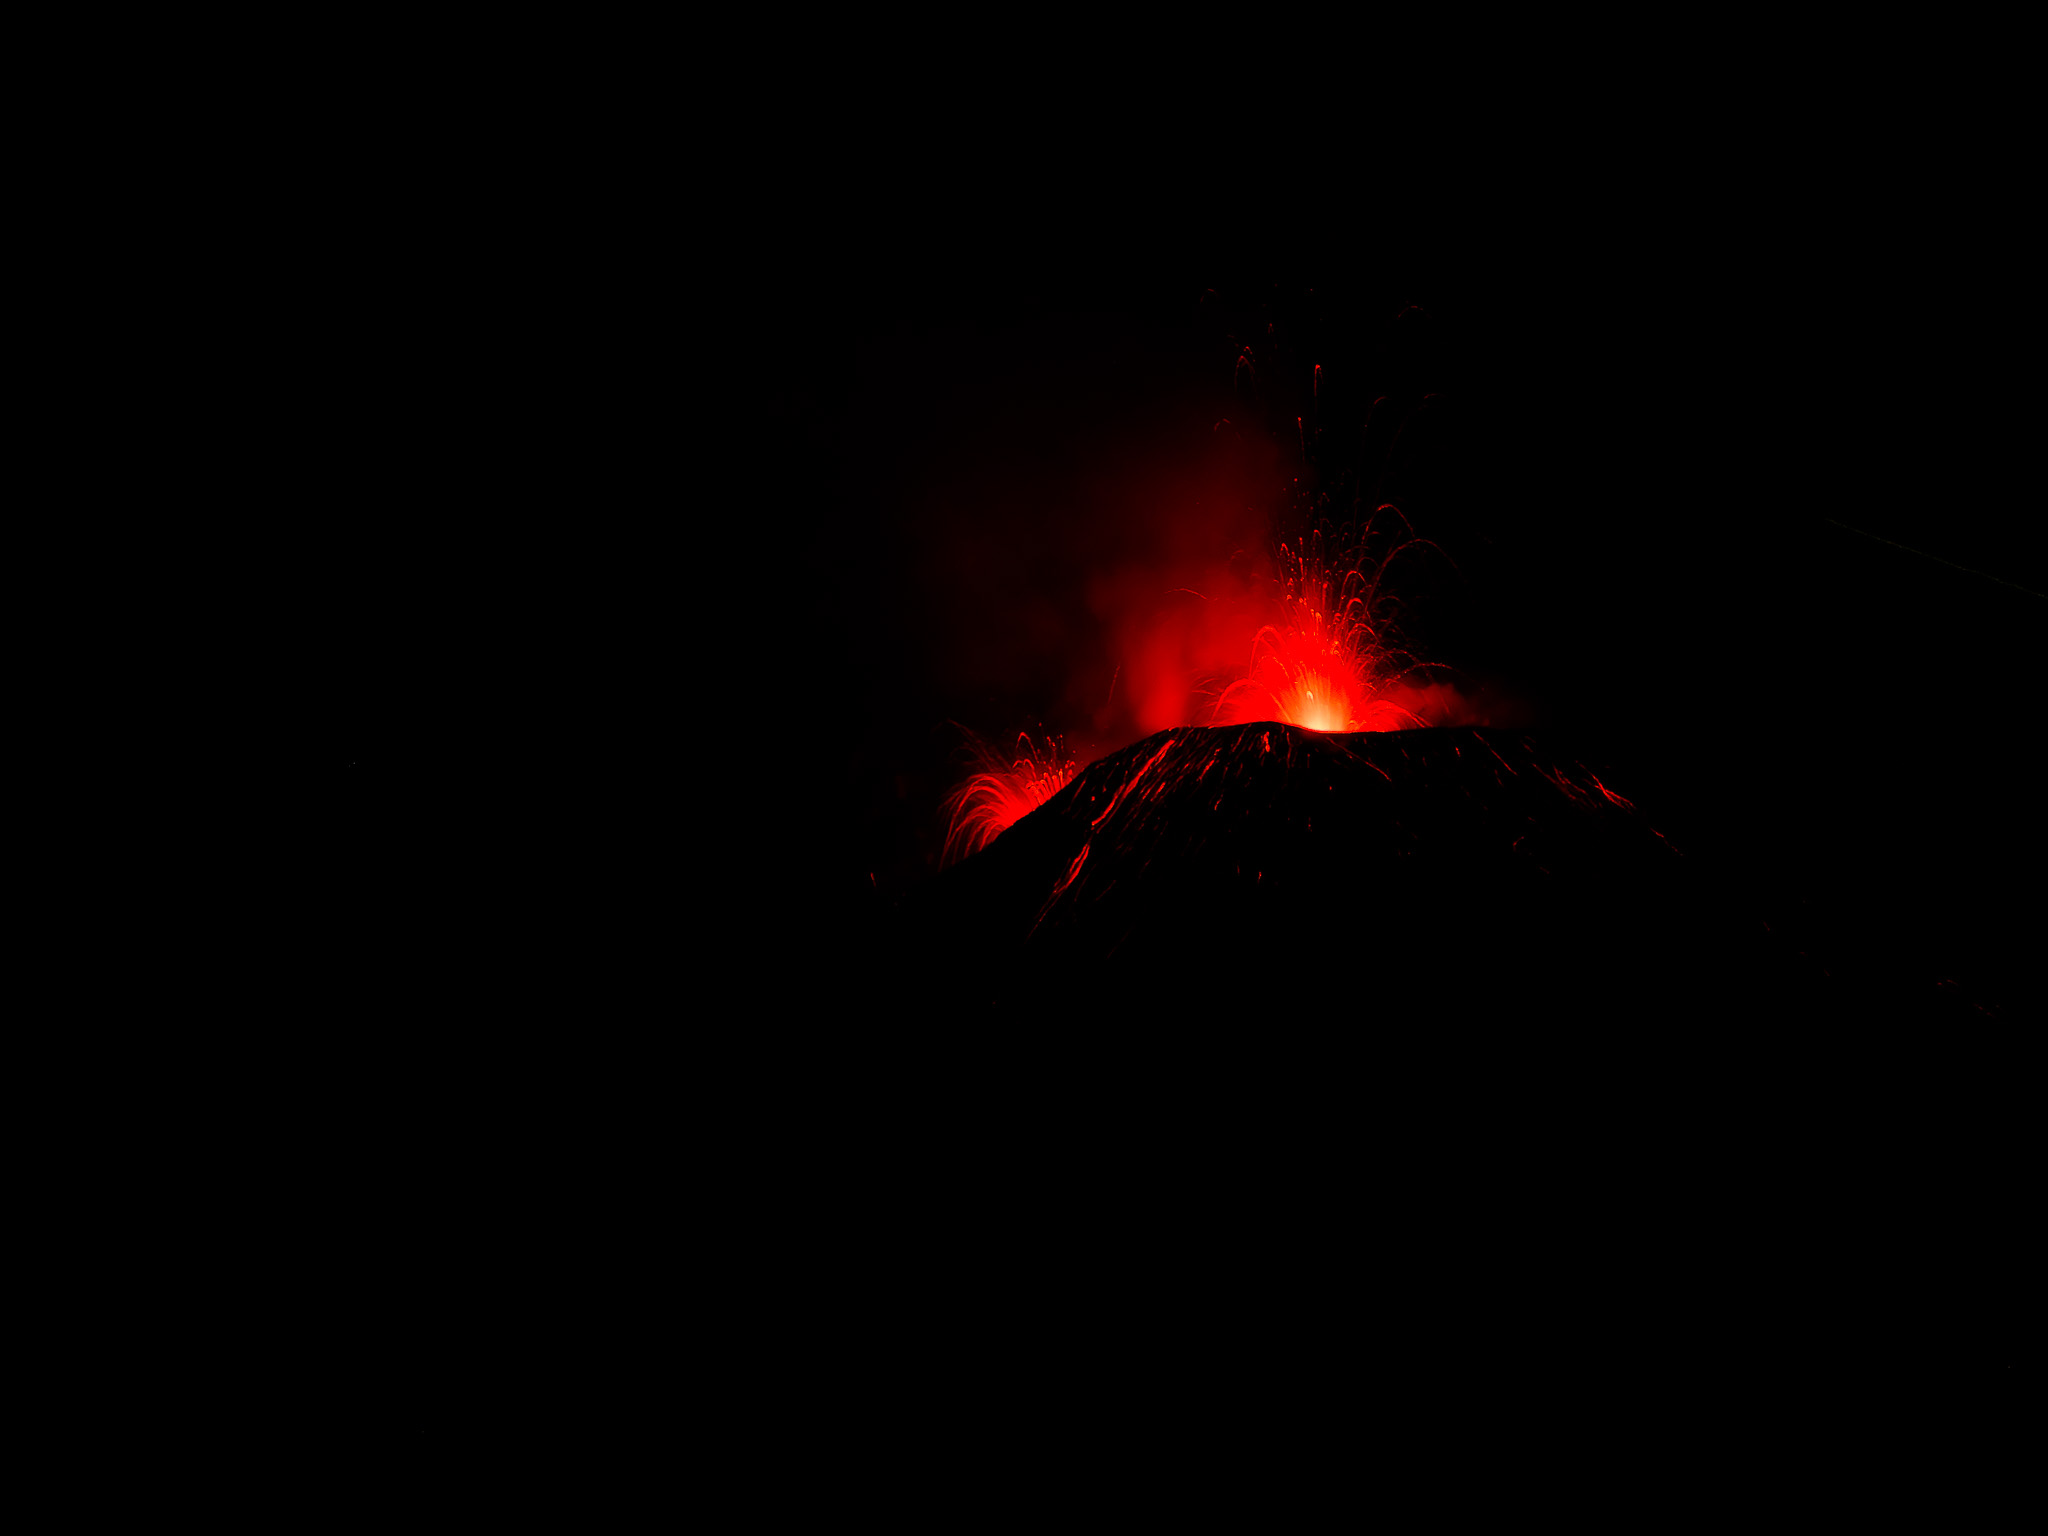 The outburst of the great volcano, Etna...